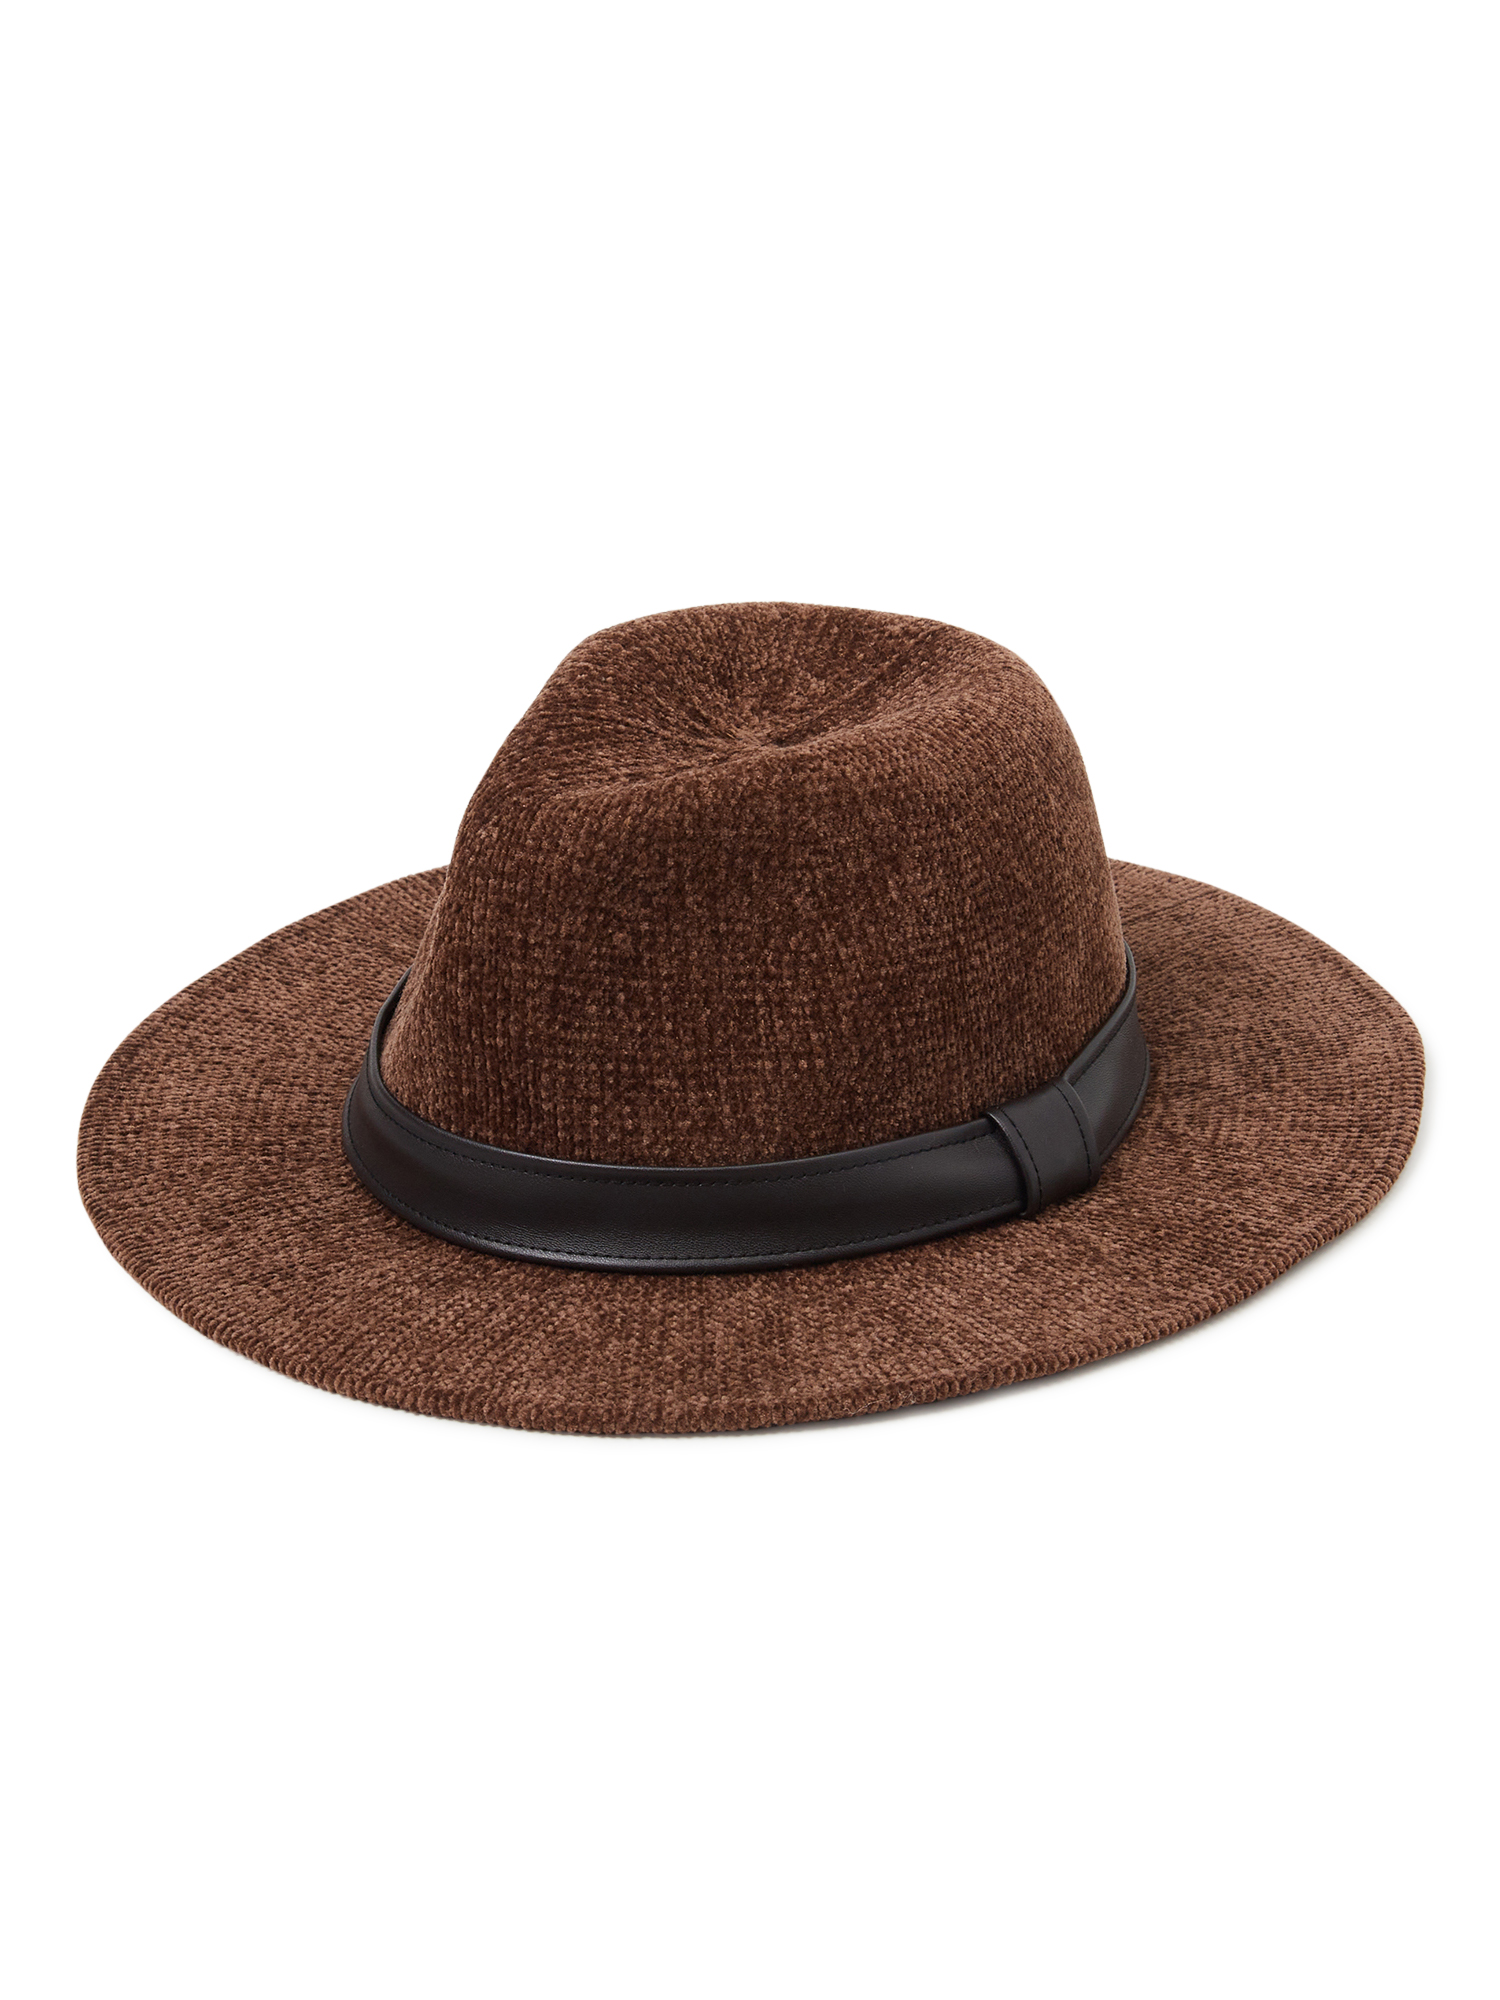 Scoop Adult Female Chenille Fedora with Faux Leather Trim - image 1 of 3